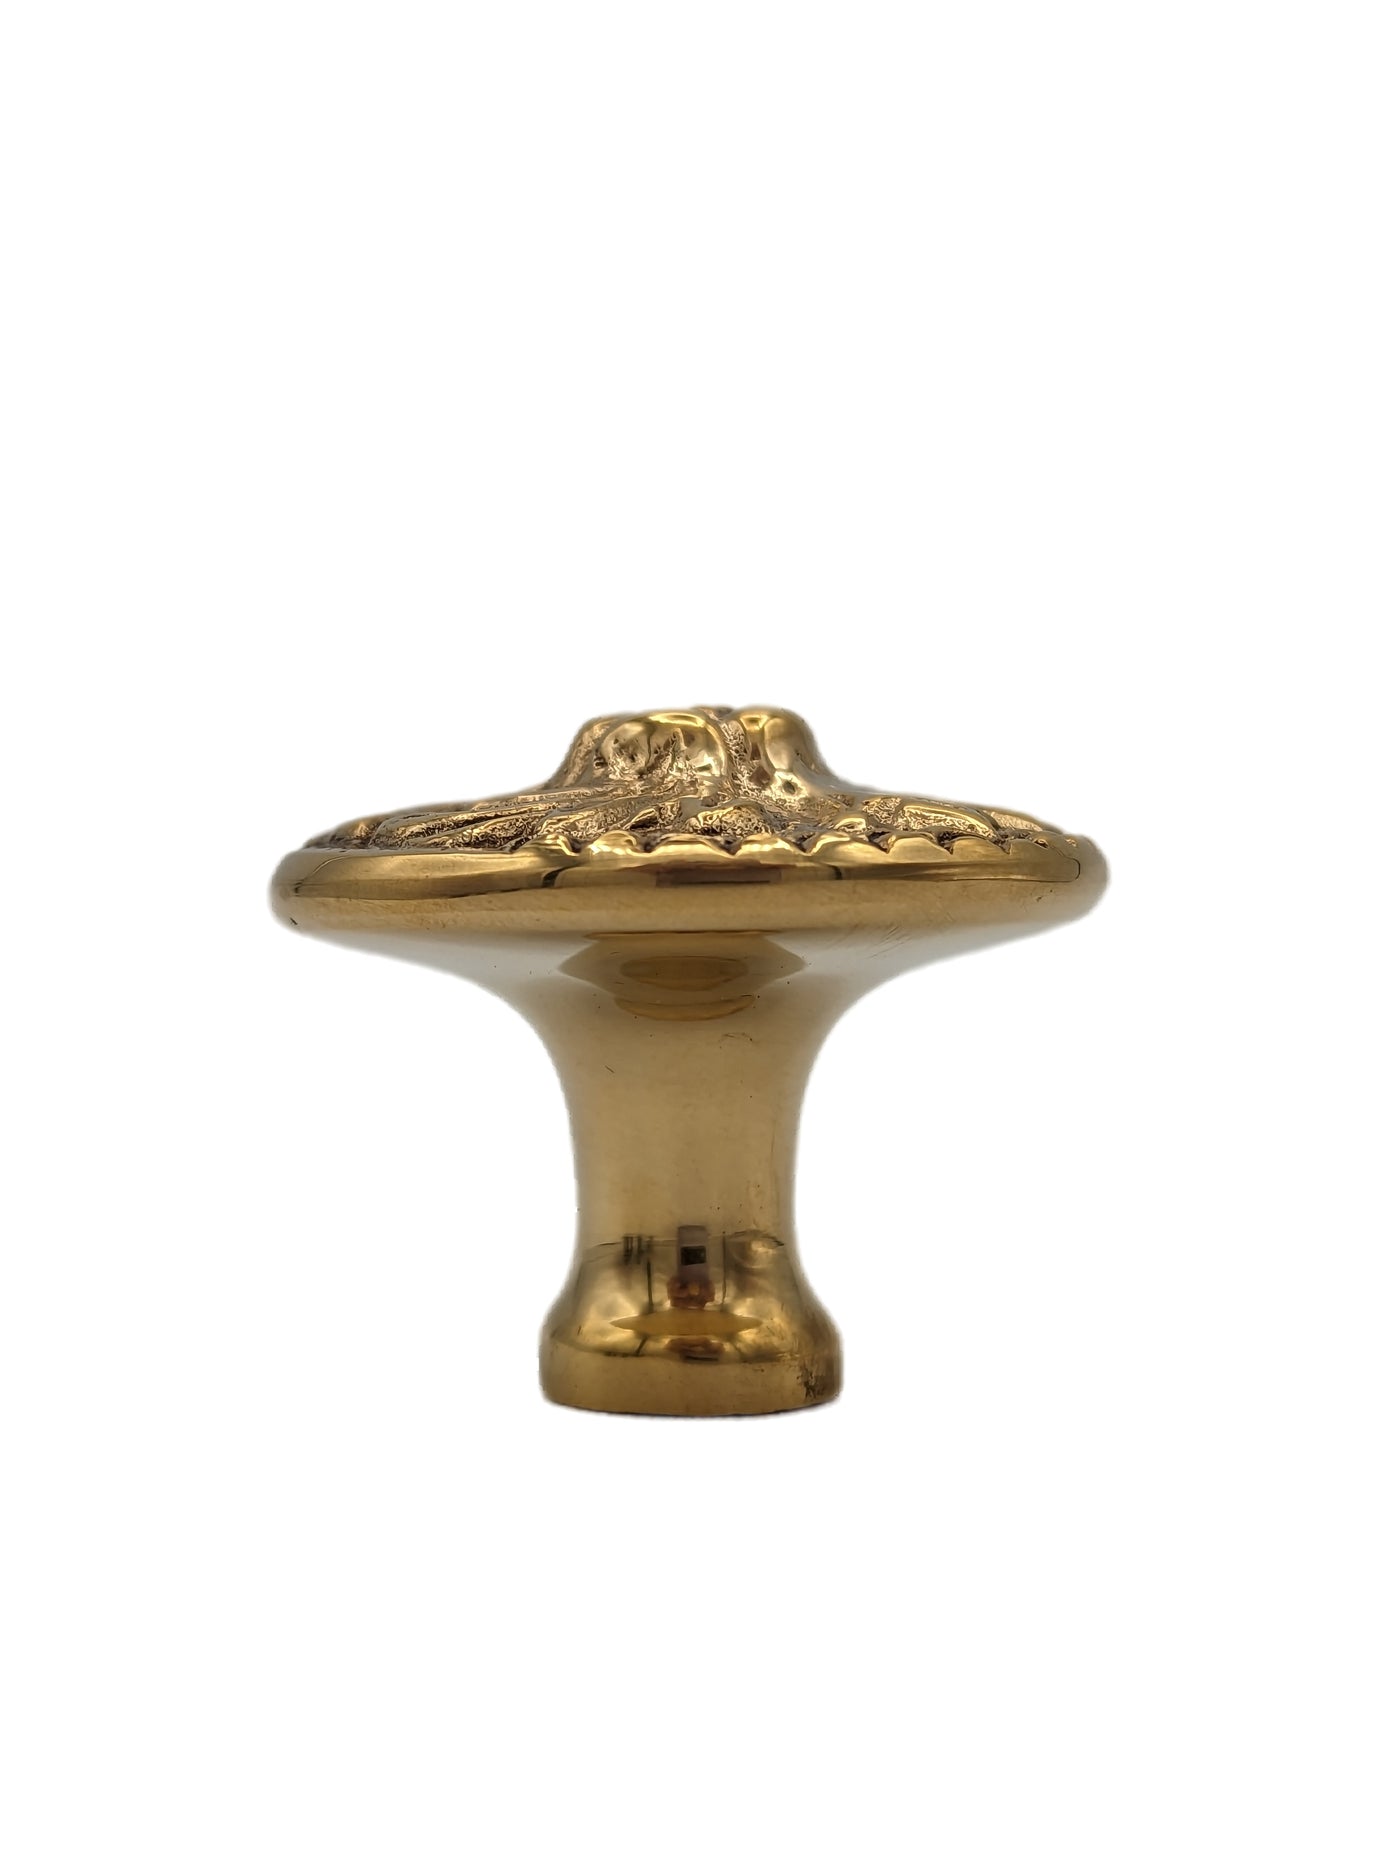 1 1/2 Inch Solid Brass Designer Rococo Cabinet and Furniture Knob (Several Finishes Available)